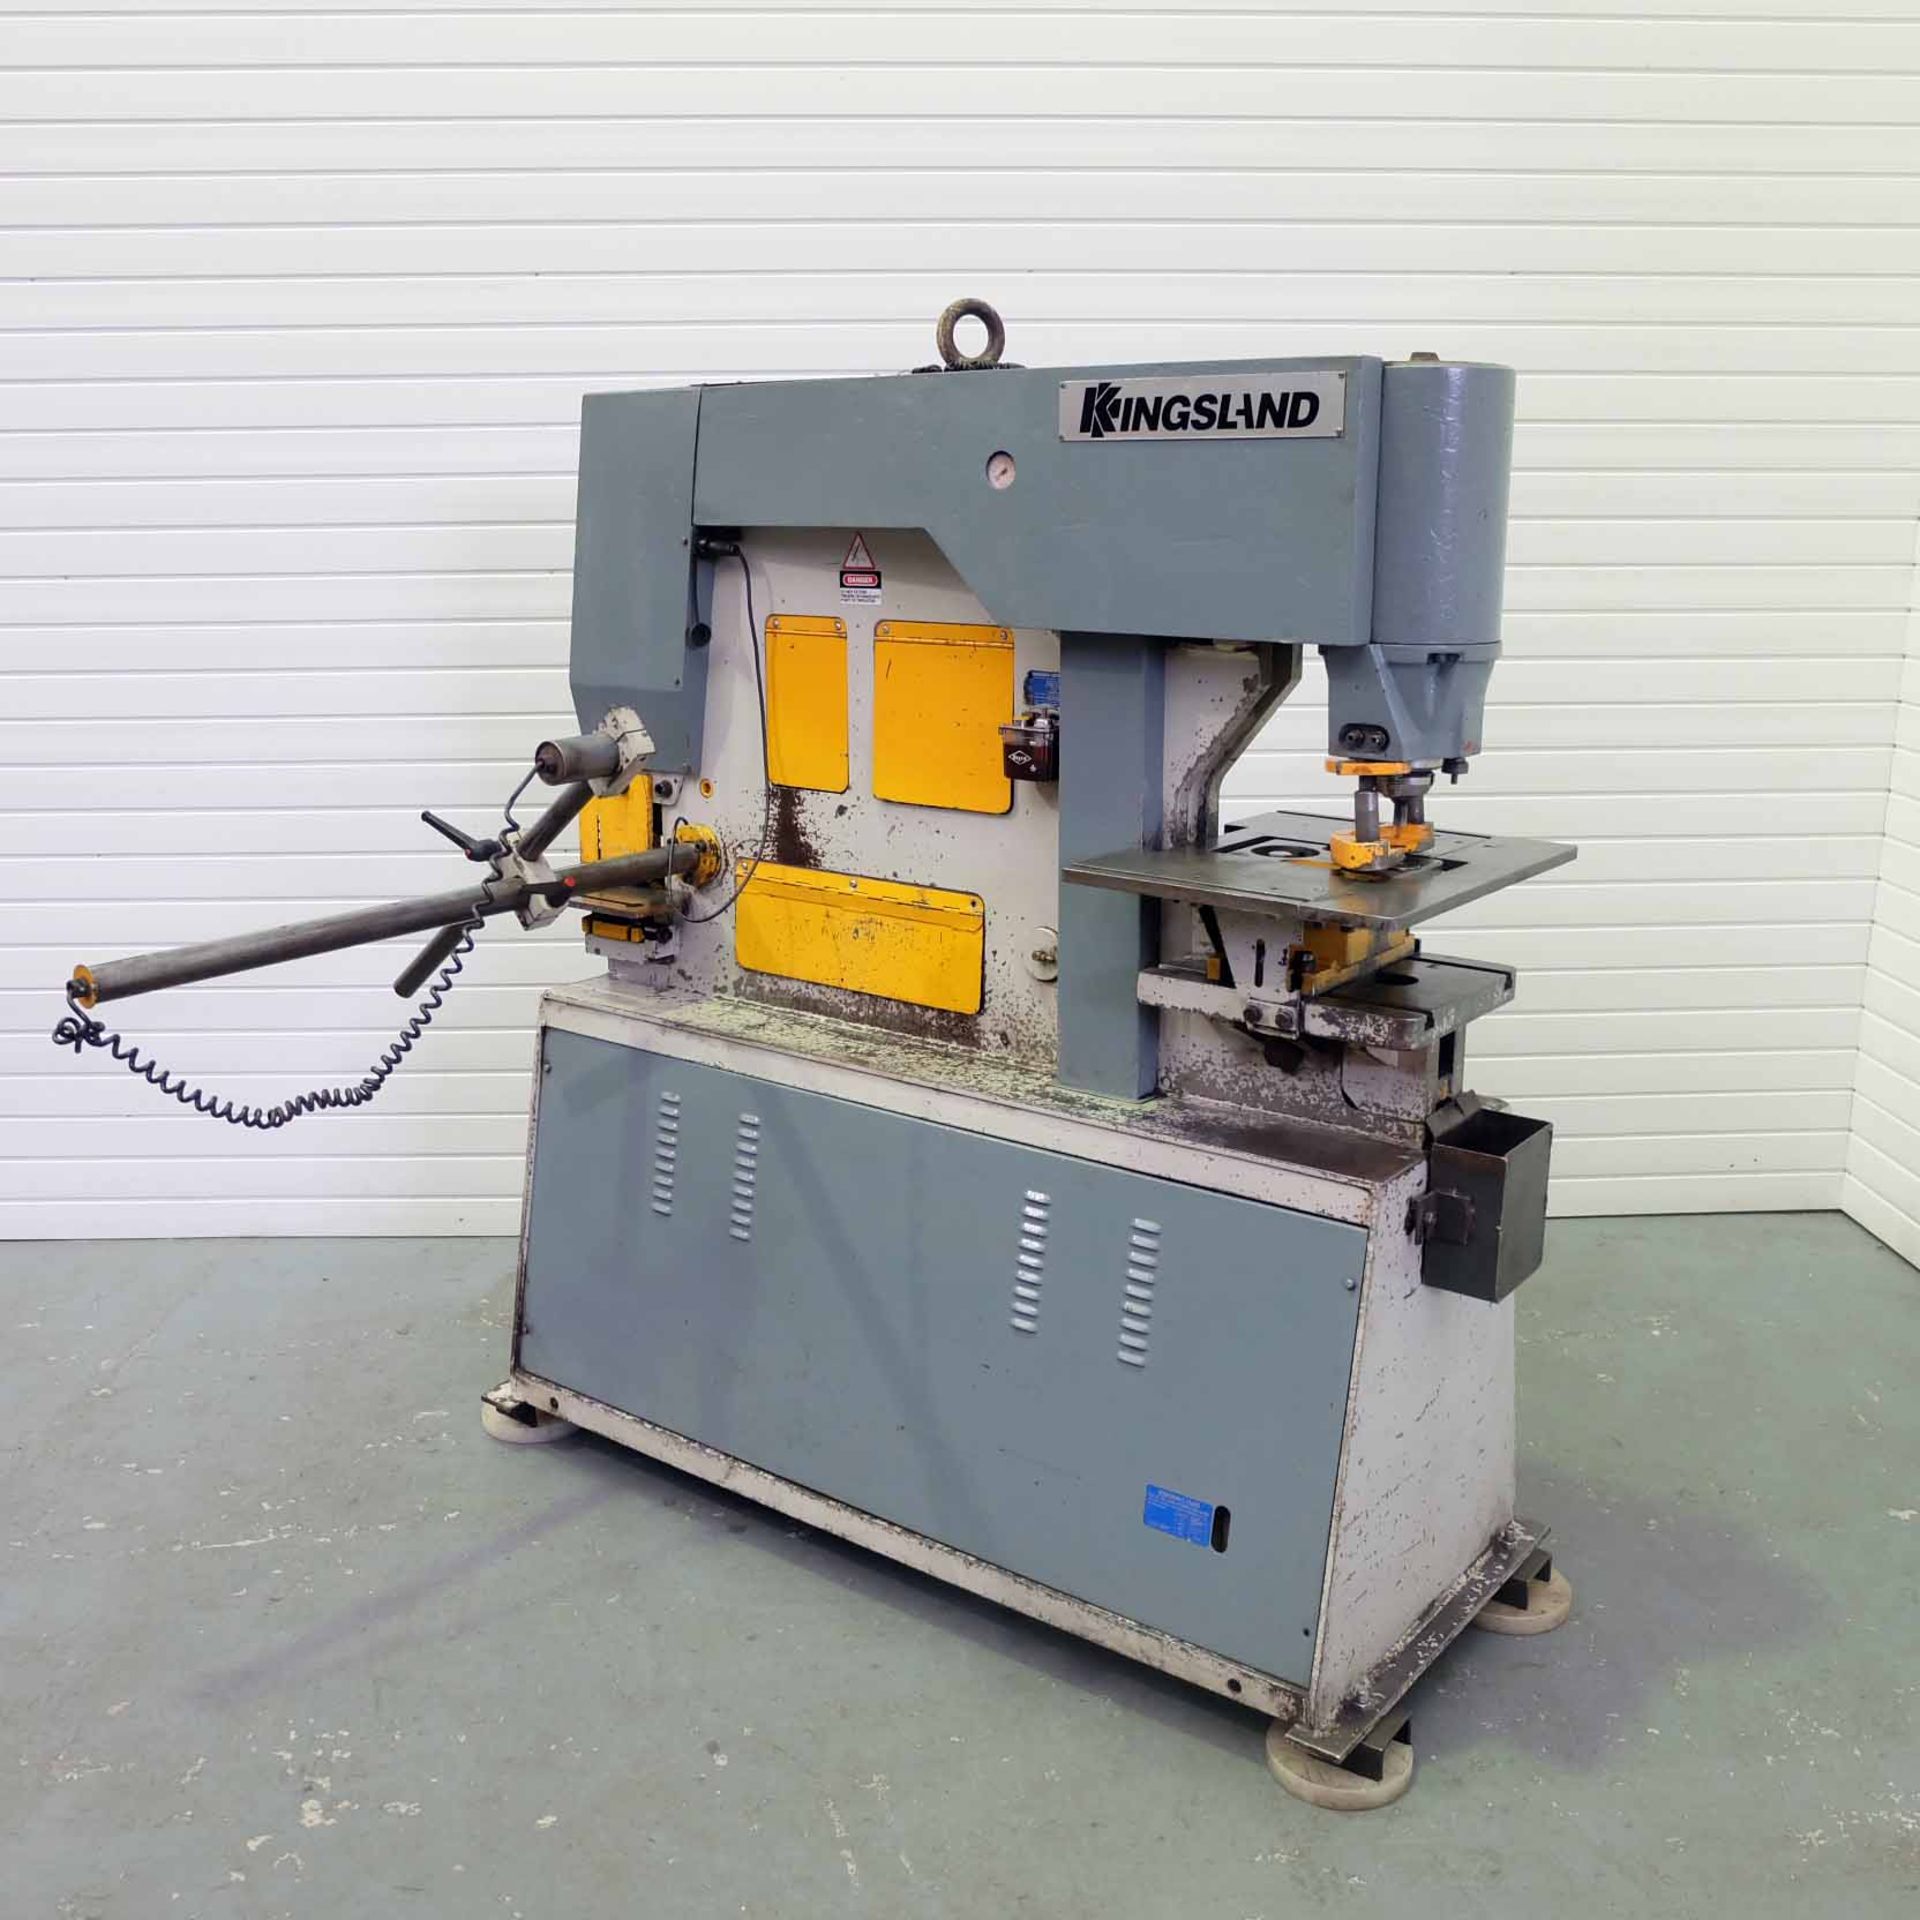 Kingsland 70XS Hydraulic Steel Worker. Capacity 70 Ton. Punch Capacity 26 x 20mm or 55 x 10mm. Secti